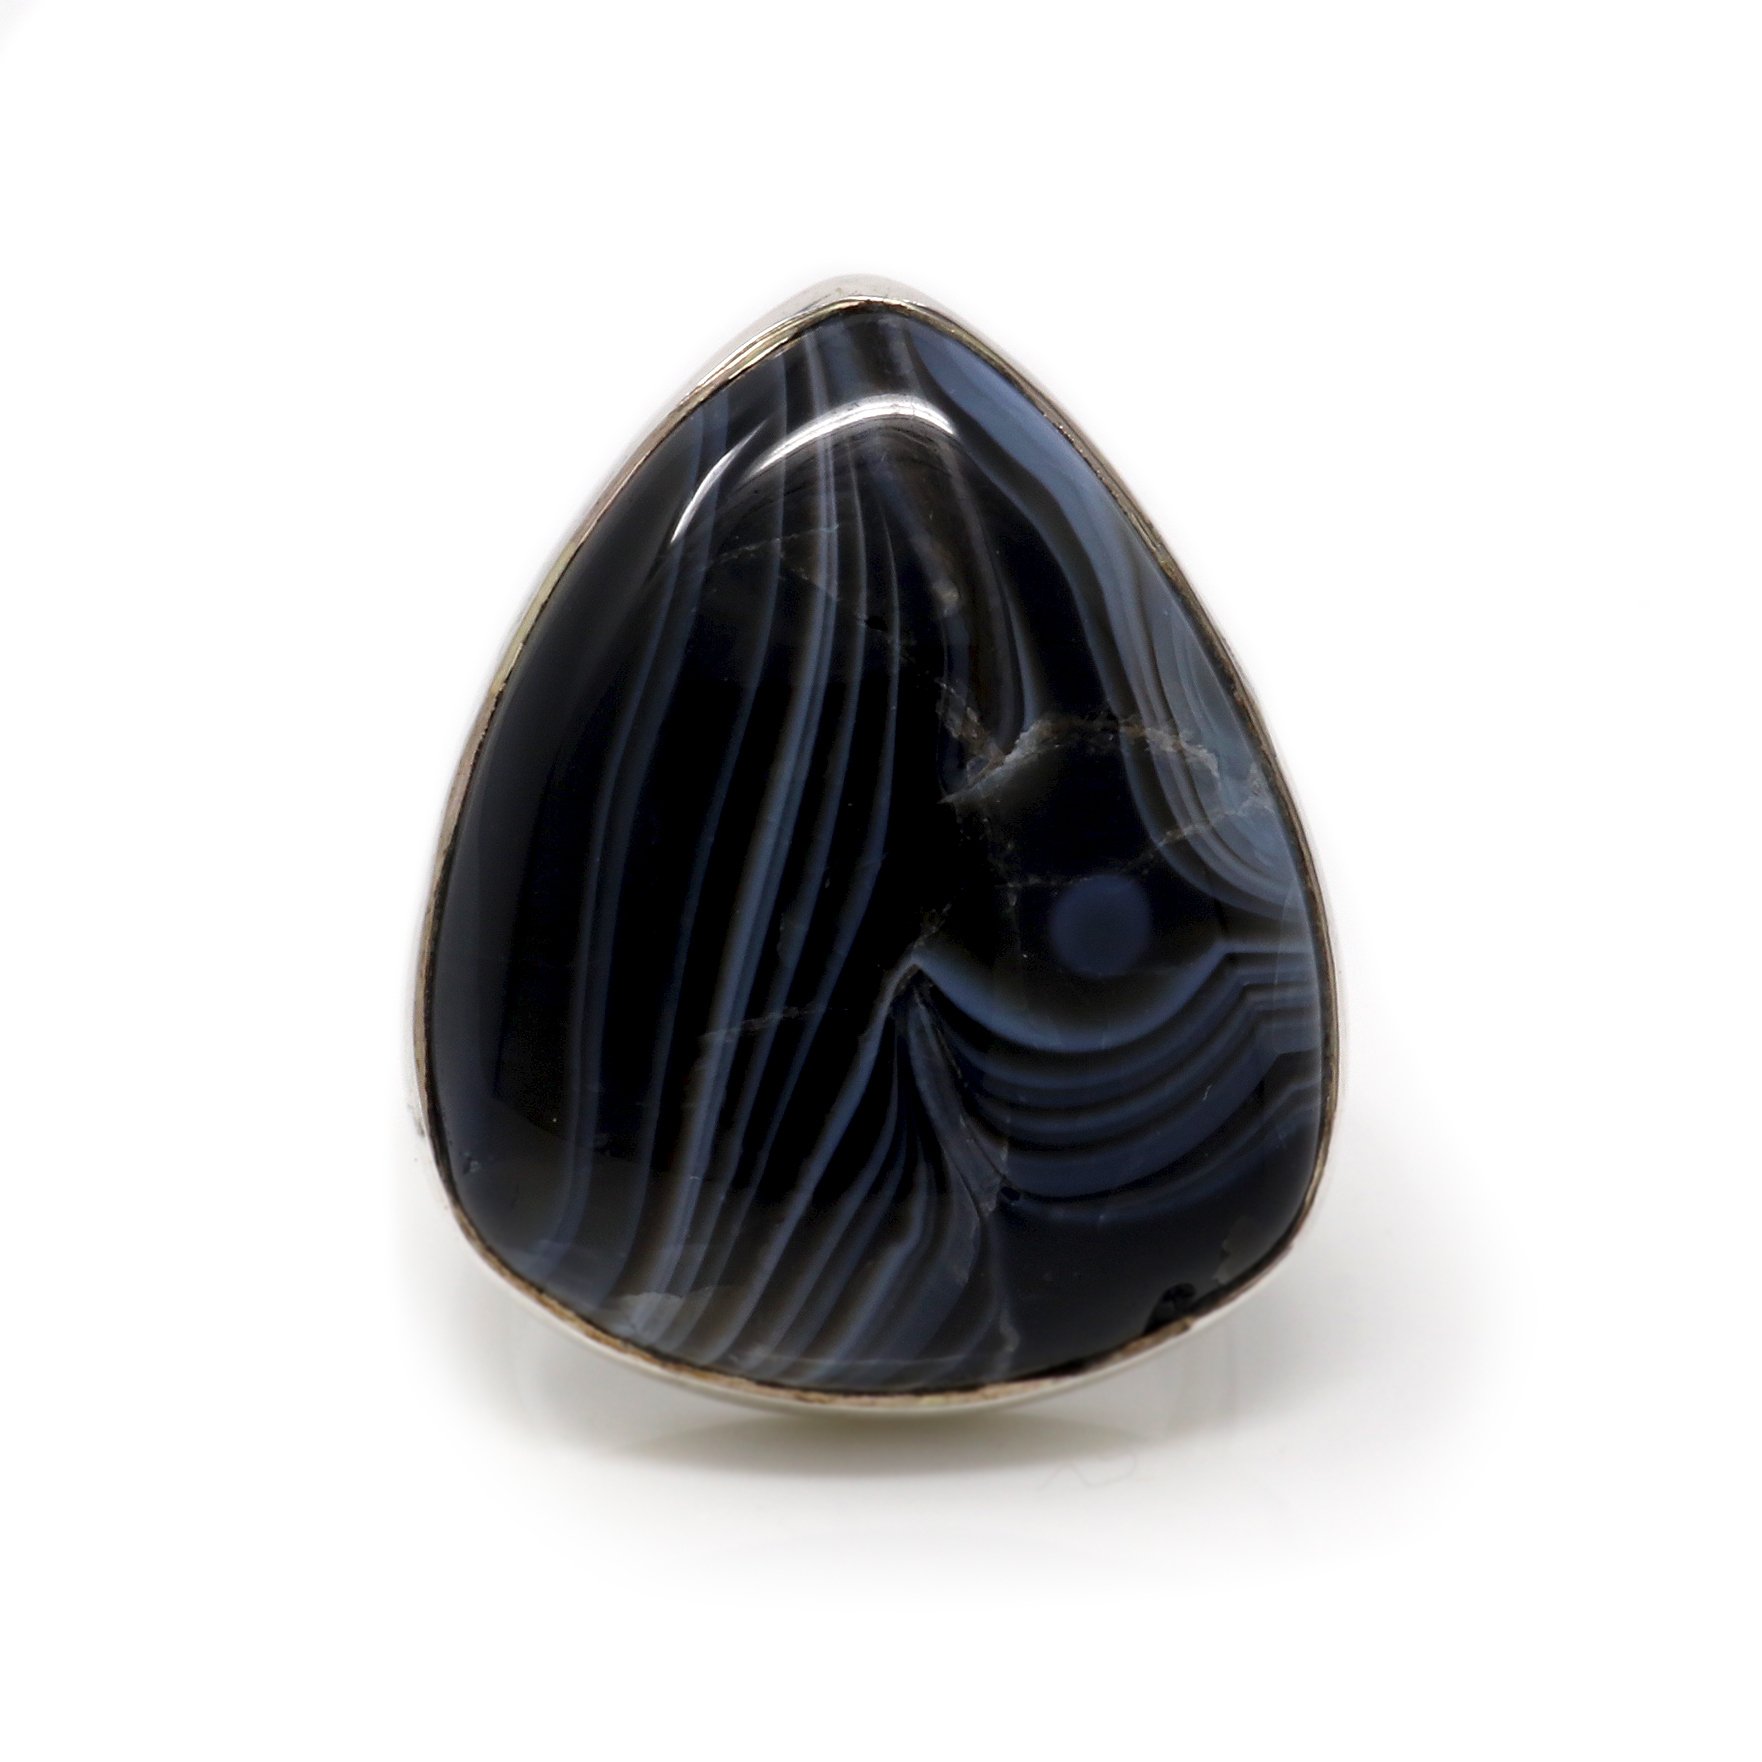 Banded Agate Ring Size 5 - Pear Cabochon With Silver Bezel - Densely Banded Black With Espresso & White